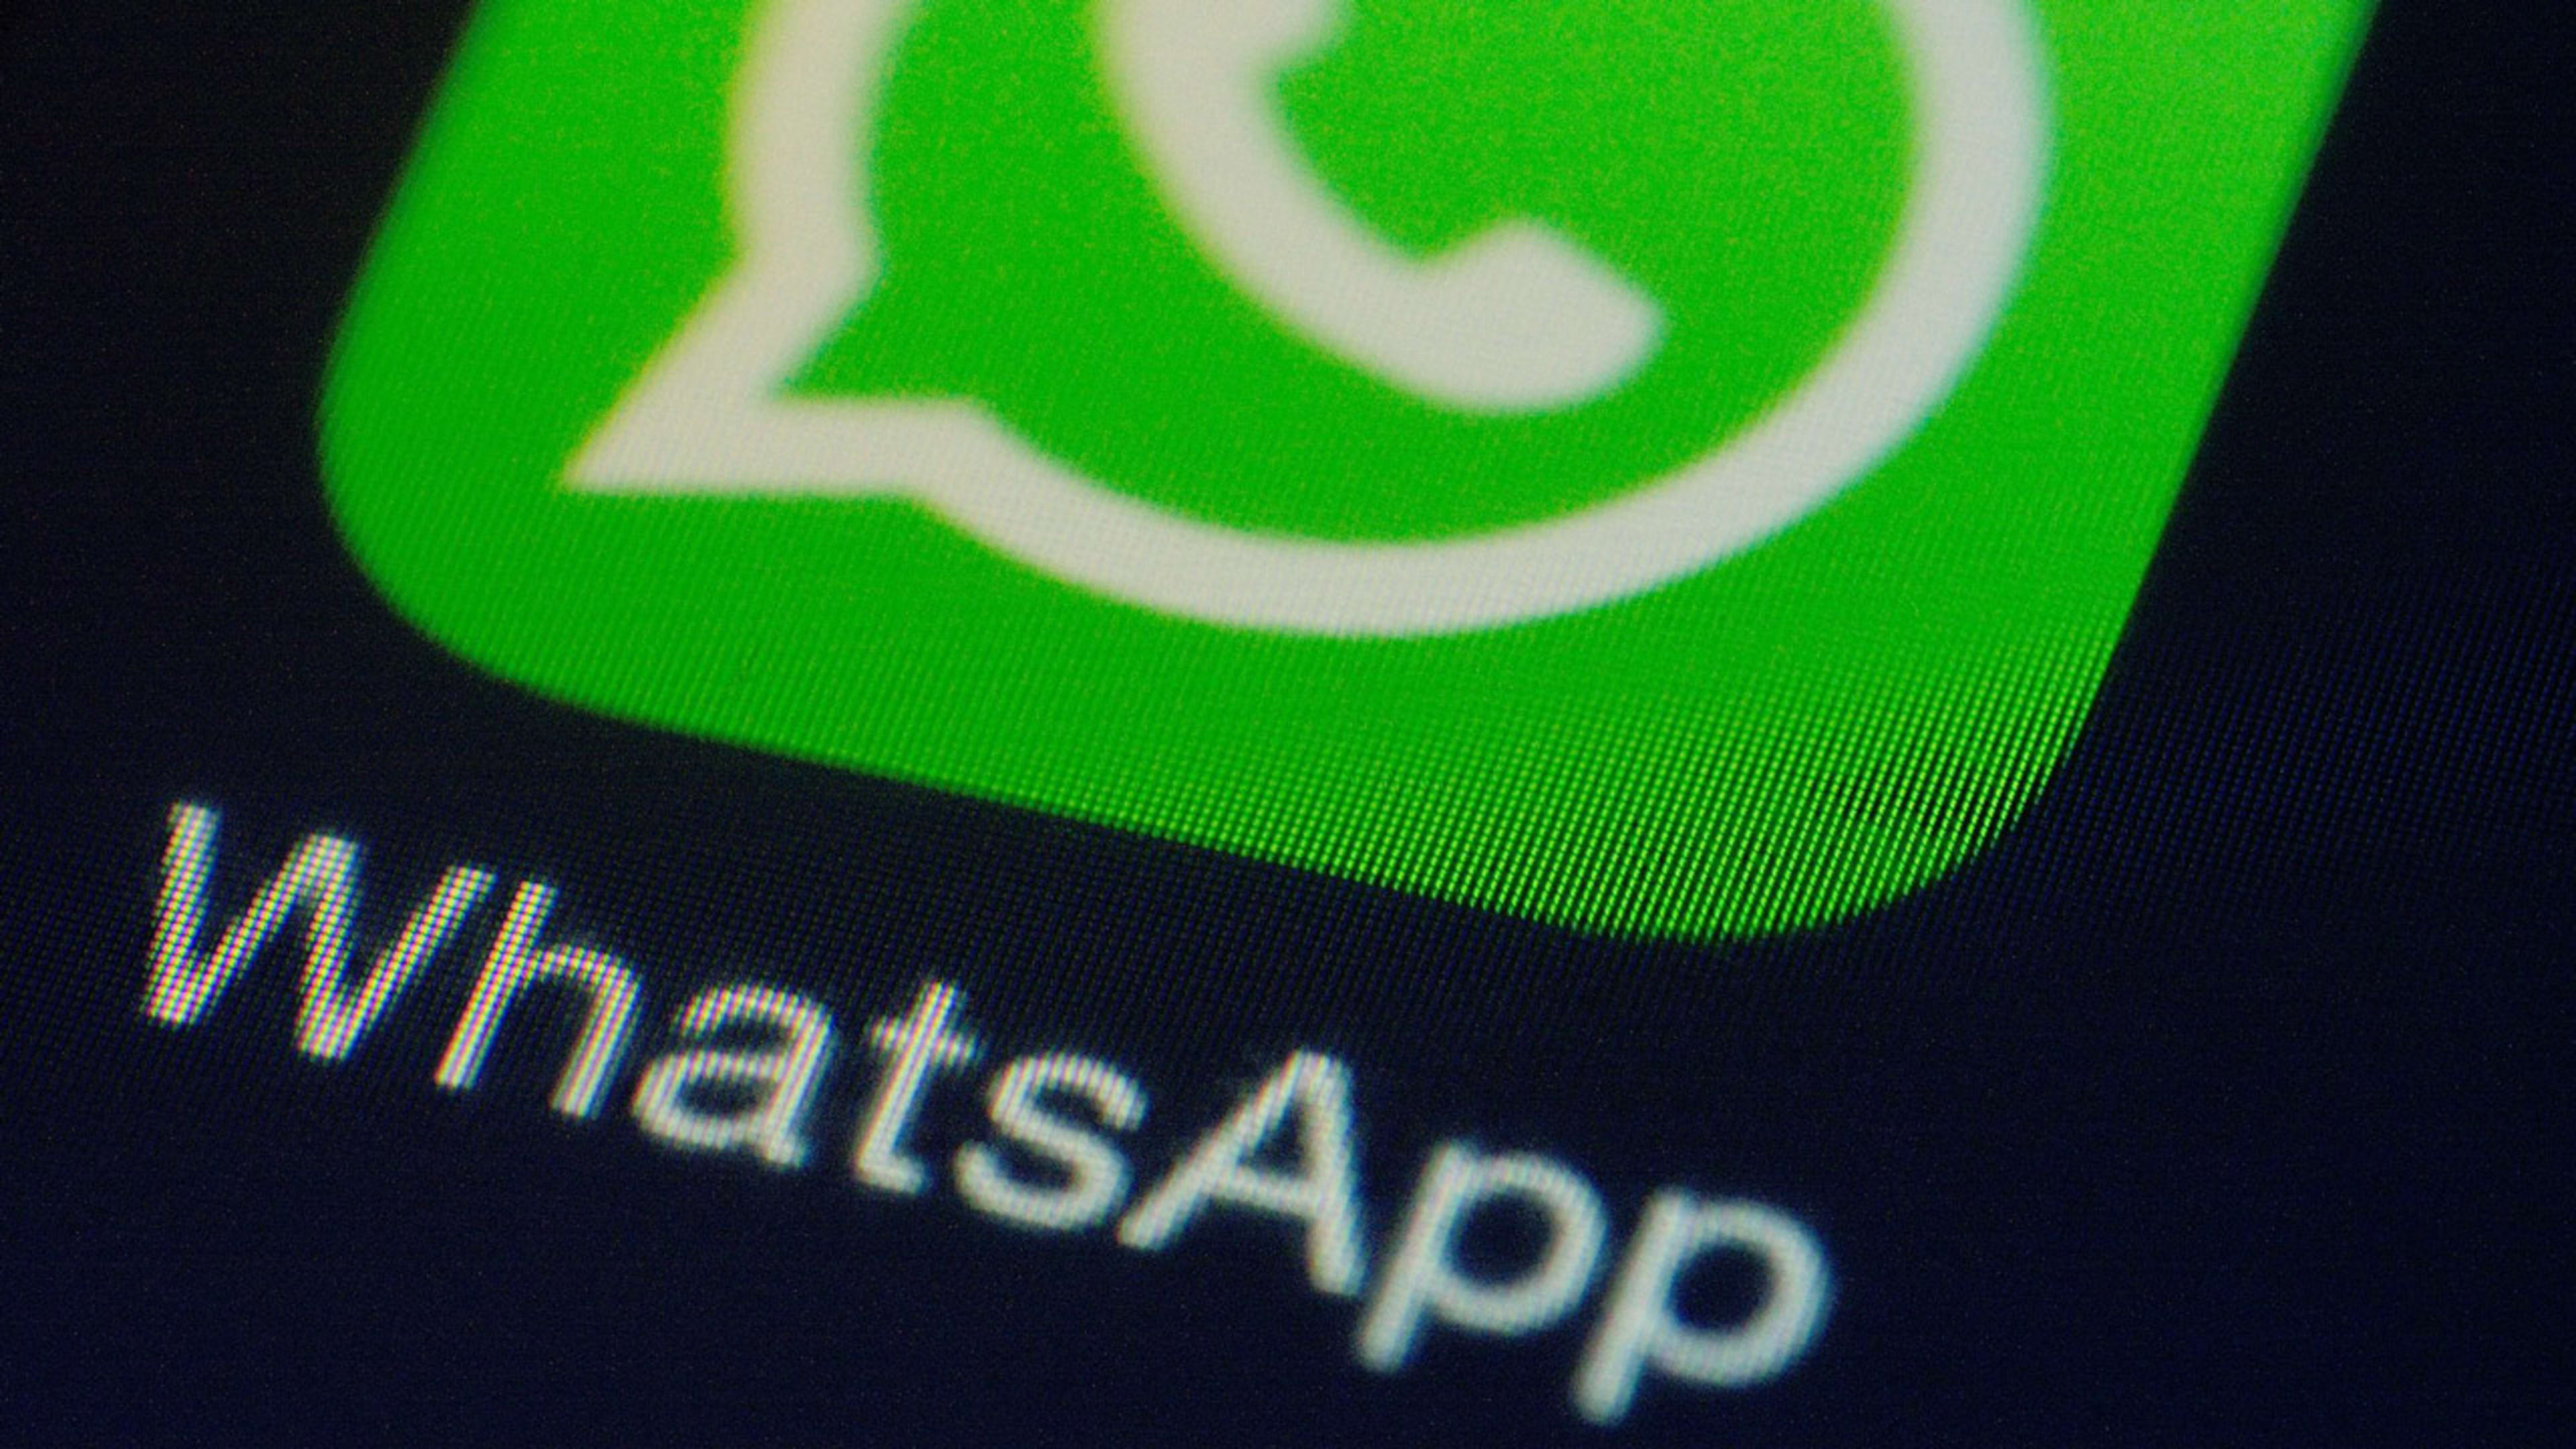 WhatsApp’s founders reportedly hated working at Facebook’s campus